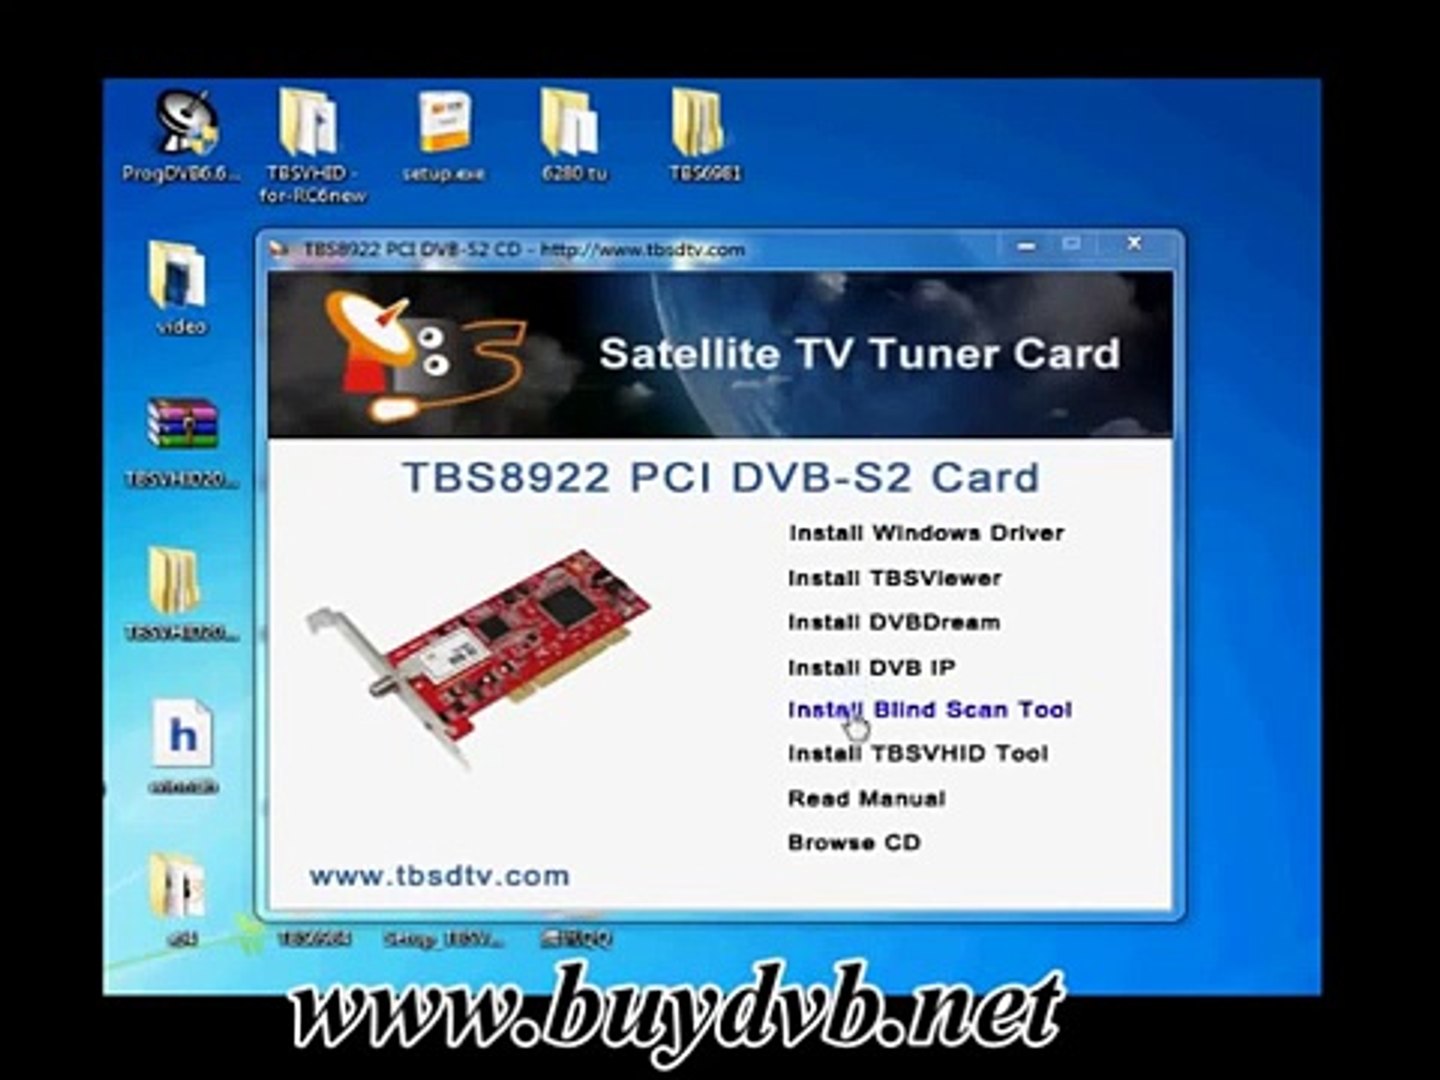 Use DVB-S2 PCI TV Tuner Card TBS8922 to watch satellite TV on Windows Media  Center - video Dailymotion